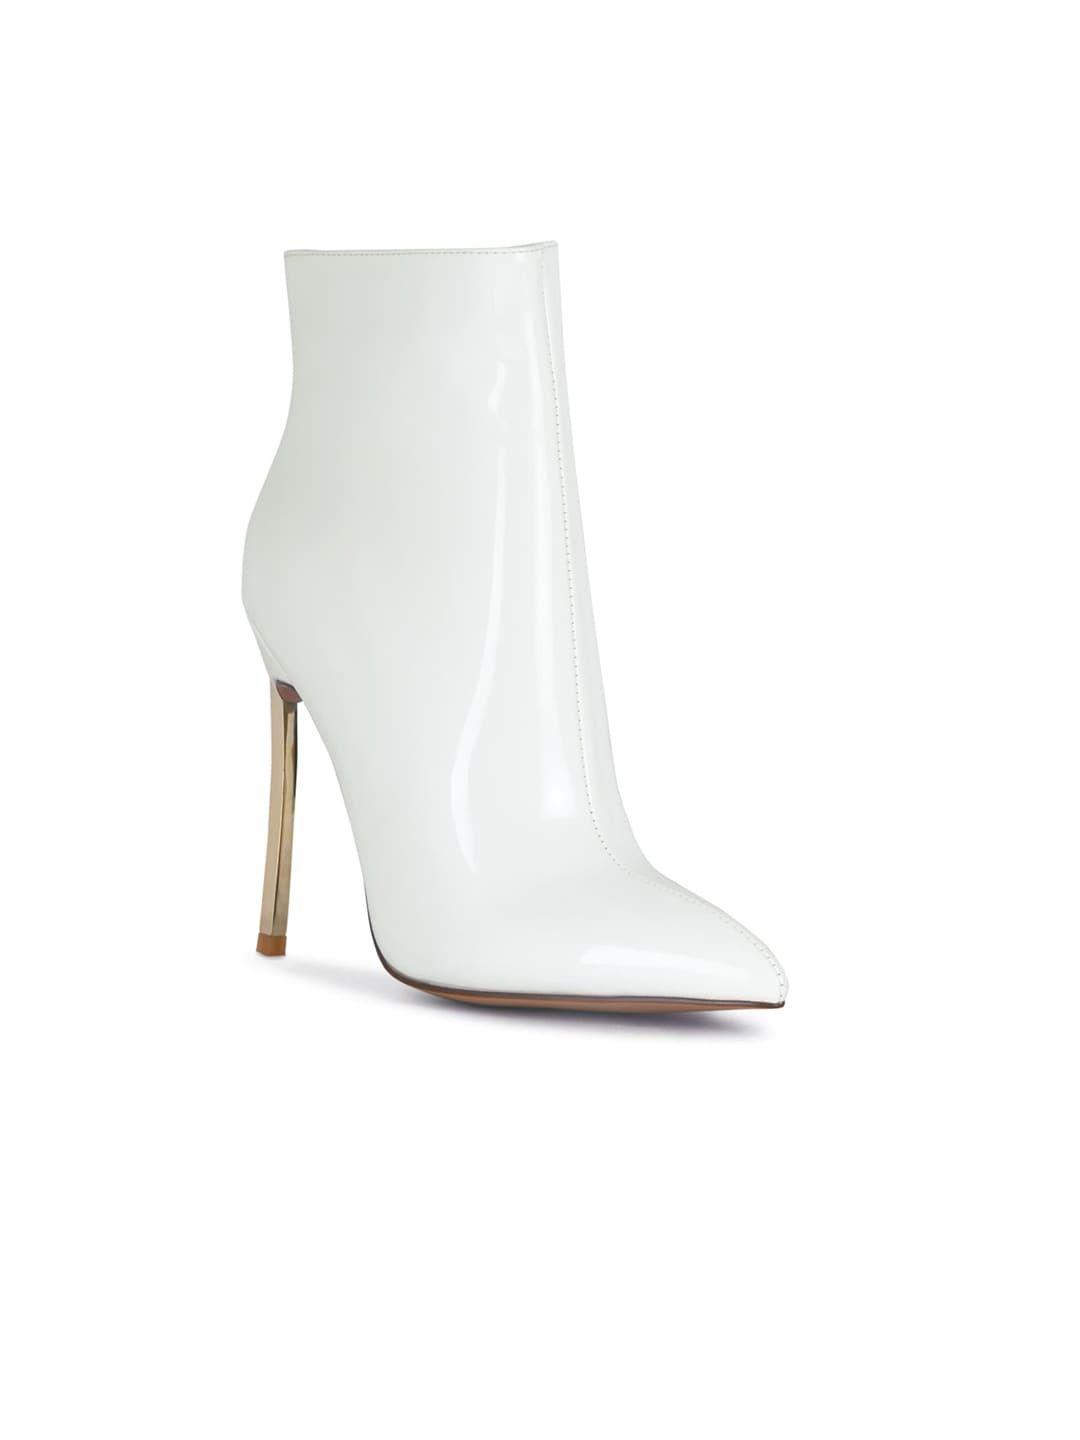 london rag women white solid mid-top heeled boots